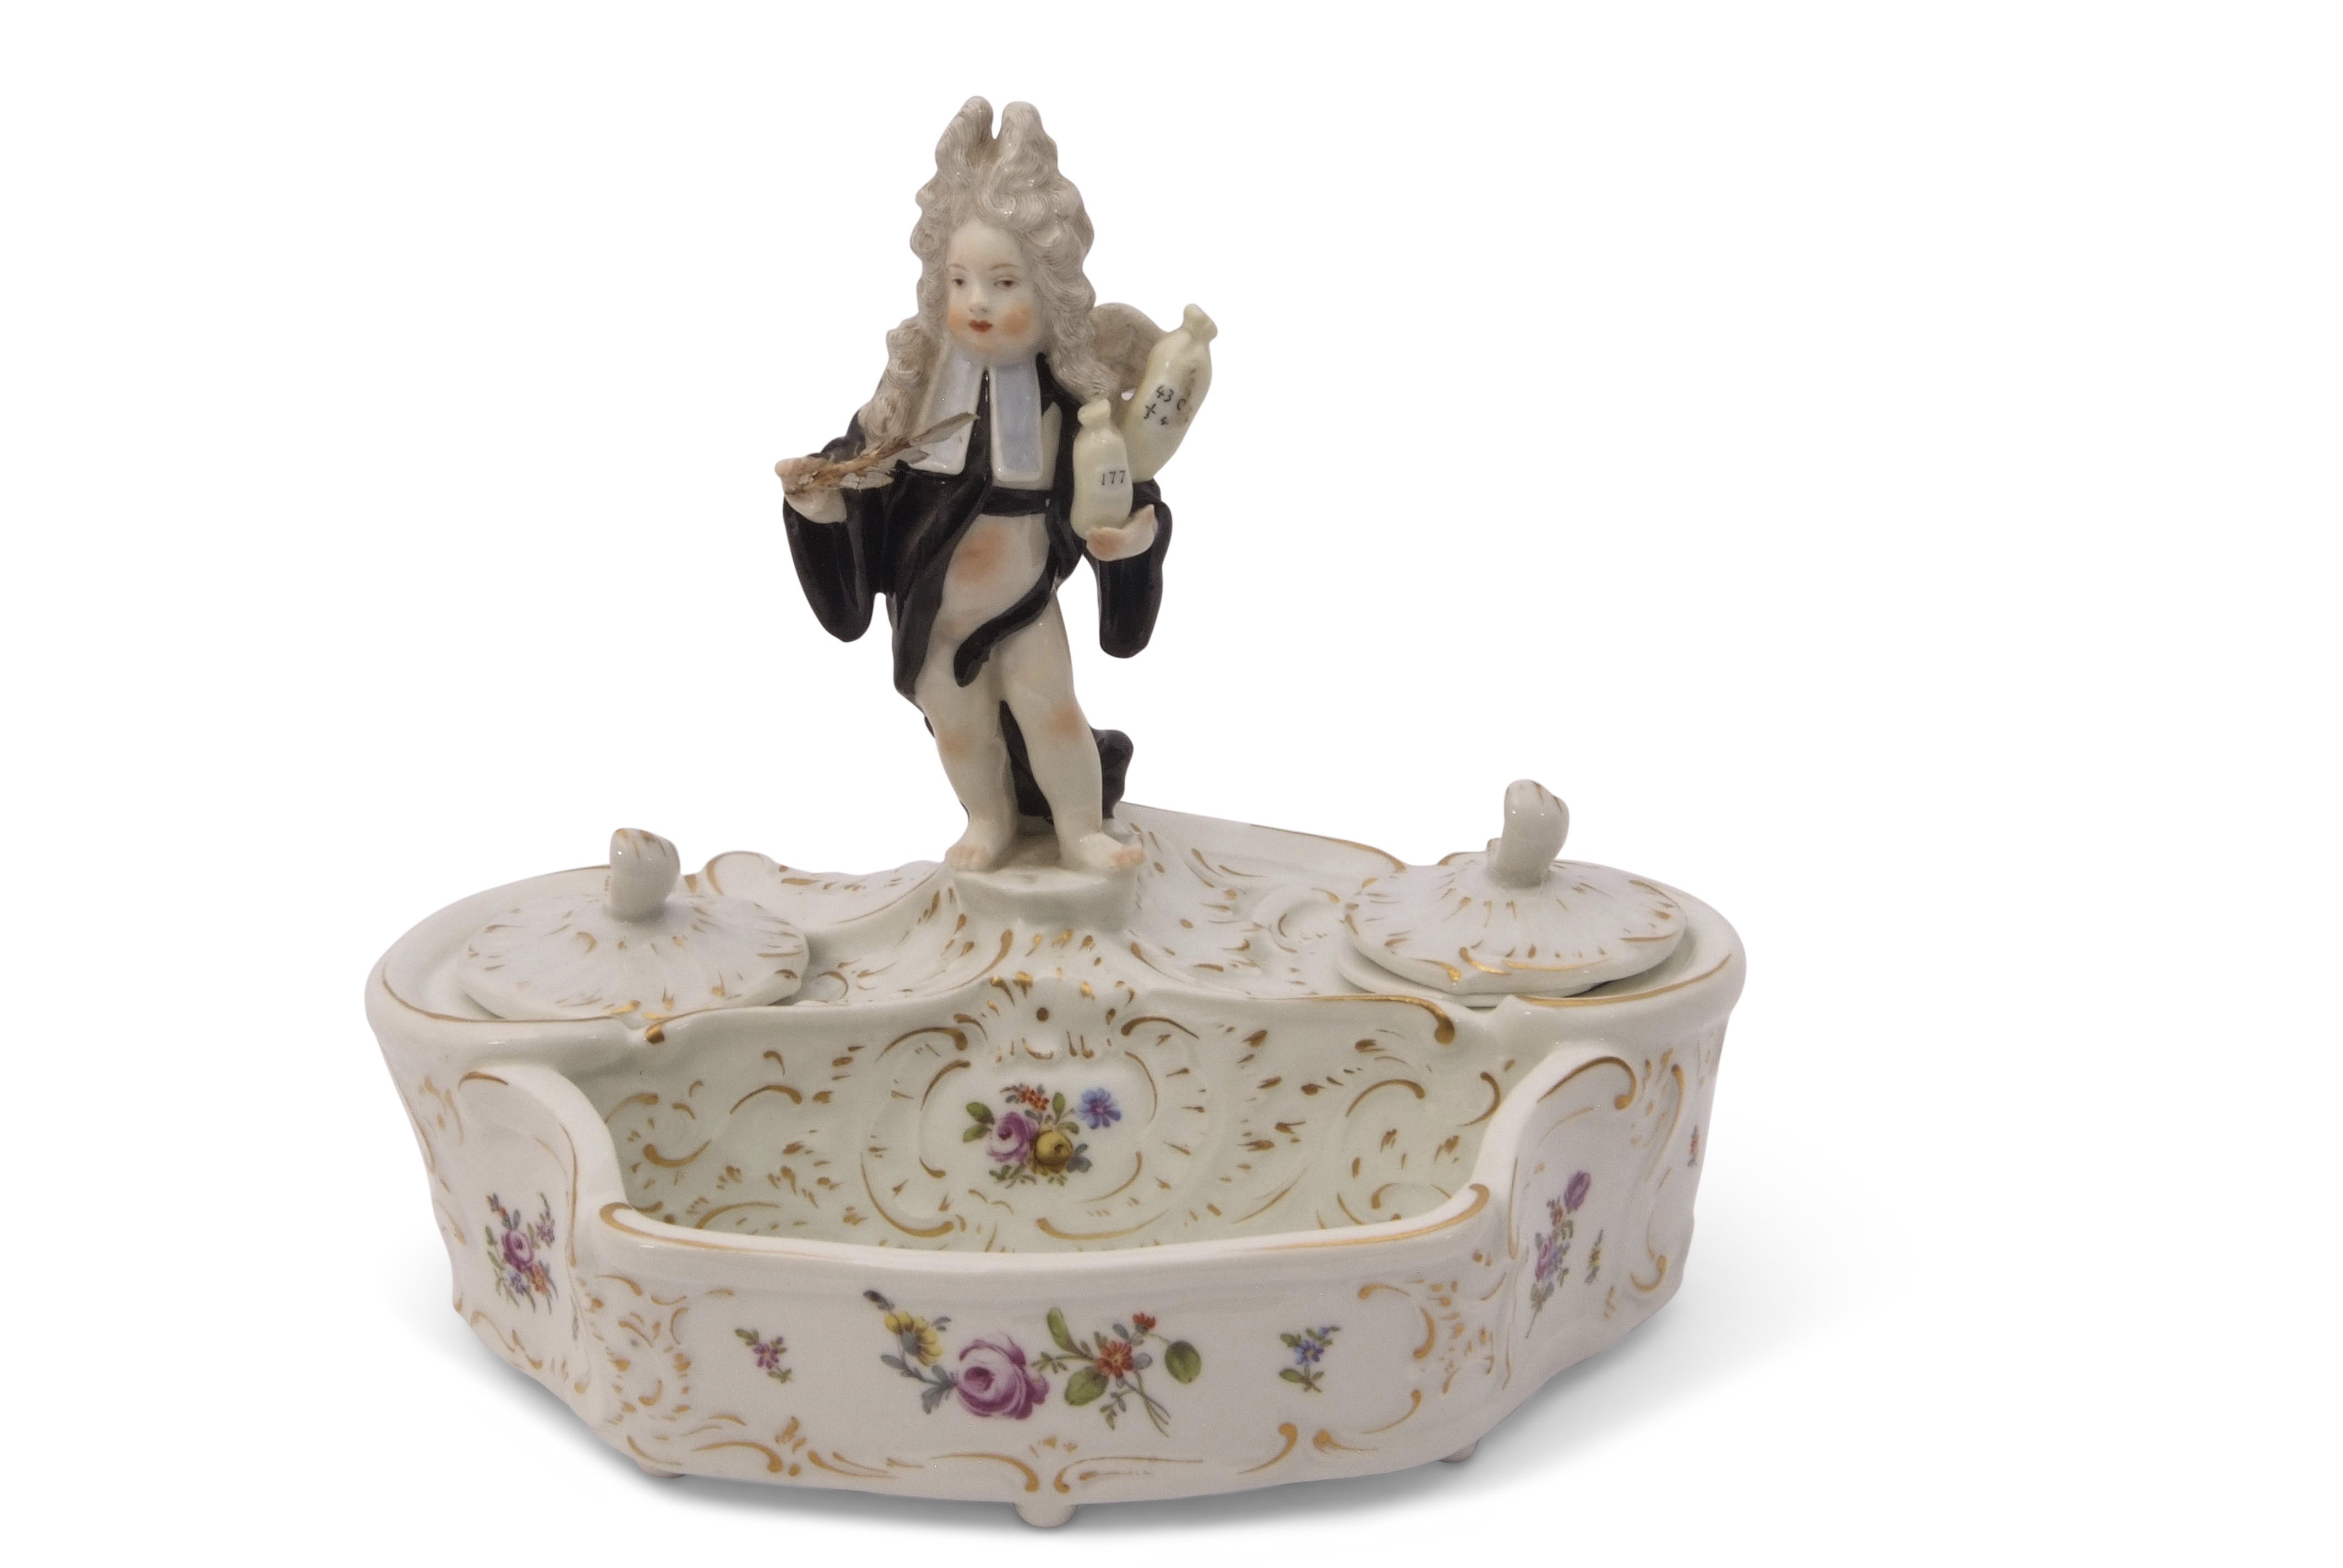 19th century Meissen style inkwell and pen tray with a cupid in disguise figure modelled as an